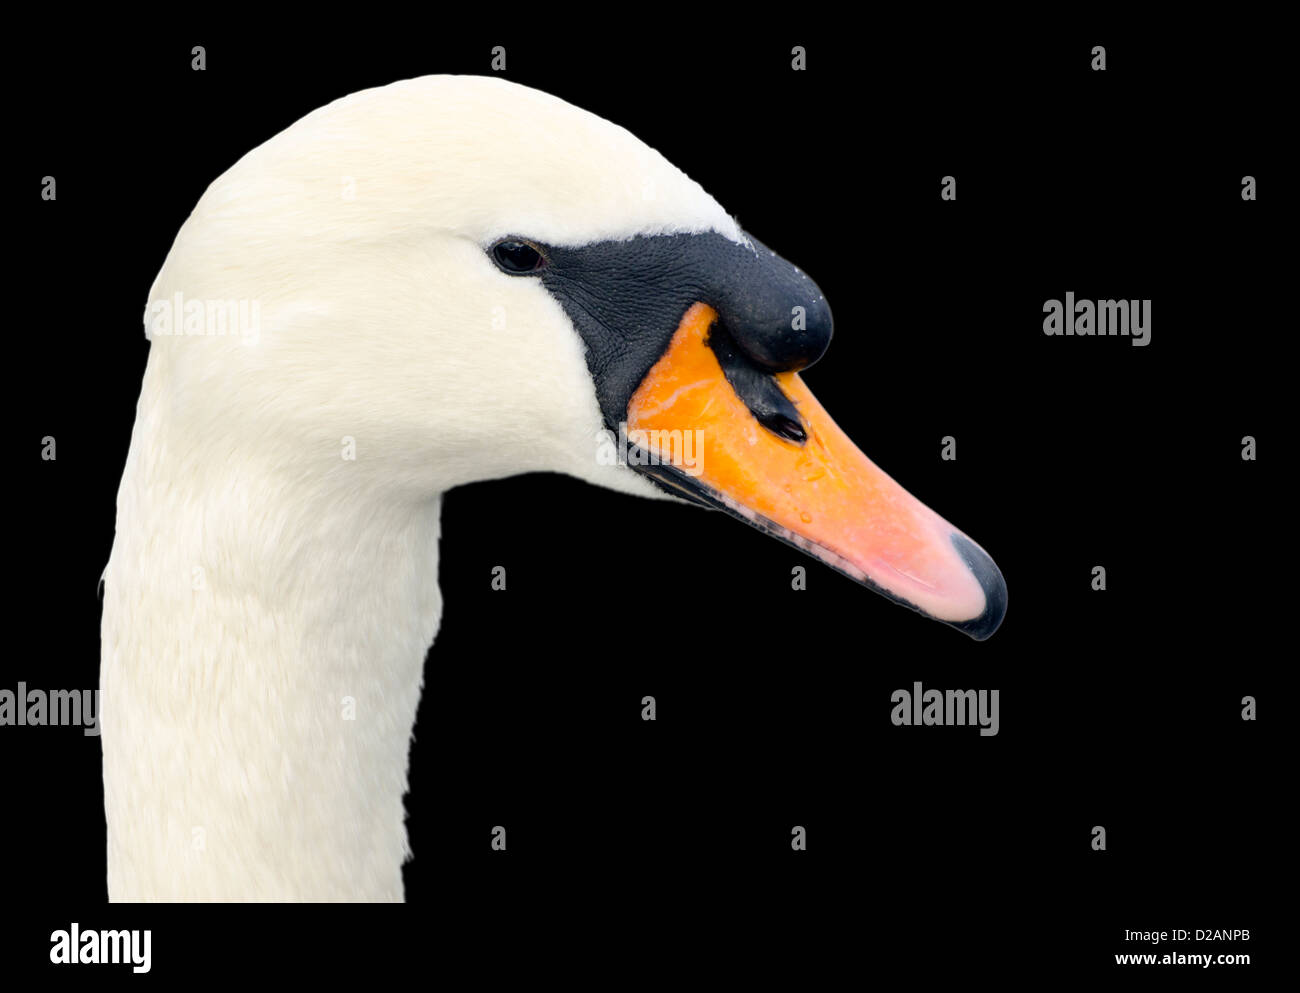 Neck and head of a White Mute Swan (Cygnus olor) against a black background. Stock Photo